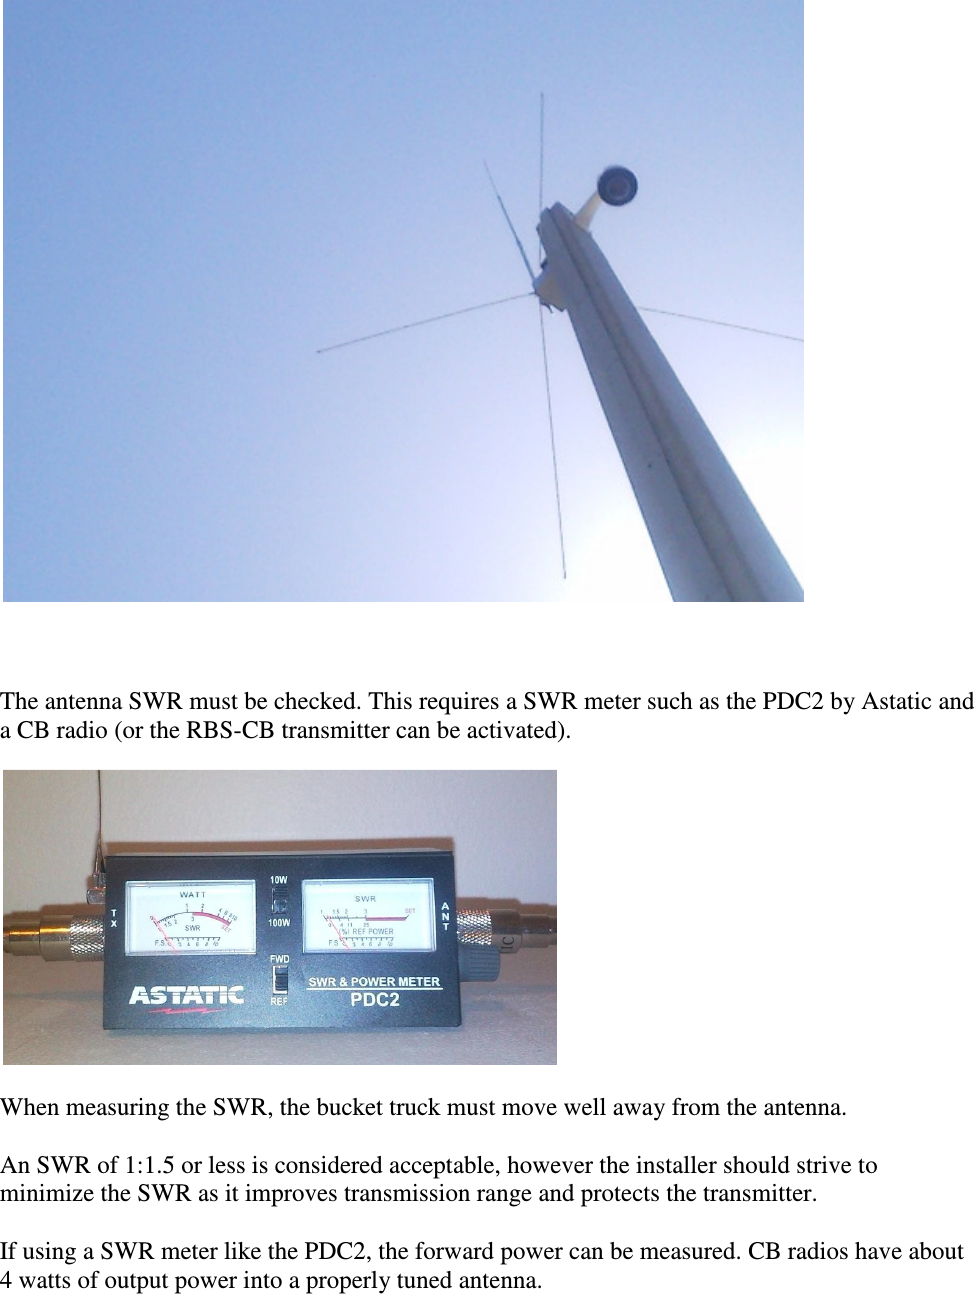     The antenna SWR must be checked. This requires a SWR meter such as the PDC2 by Astatic and a CB radio (or the RBS-CB transmitter can be activated).   When measuring the SWR, the bucket truck must move well away from the antenna.  An SWR of 1:1.5 or less is considered acceptable, however the installer should strive to minimize the SWR as it improves transmission range and protects the transmitter.   If using a SWR meter like the PDC2, the forward power can be measured. CB radios have about 4 watts of output power into a properly tuned antenna.   